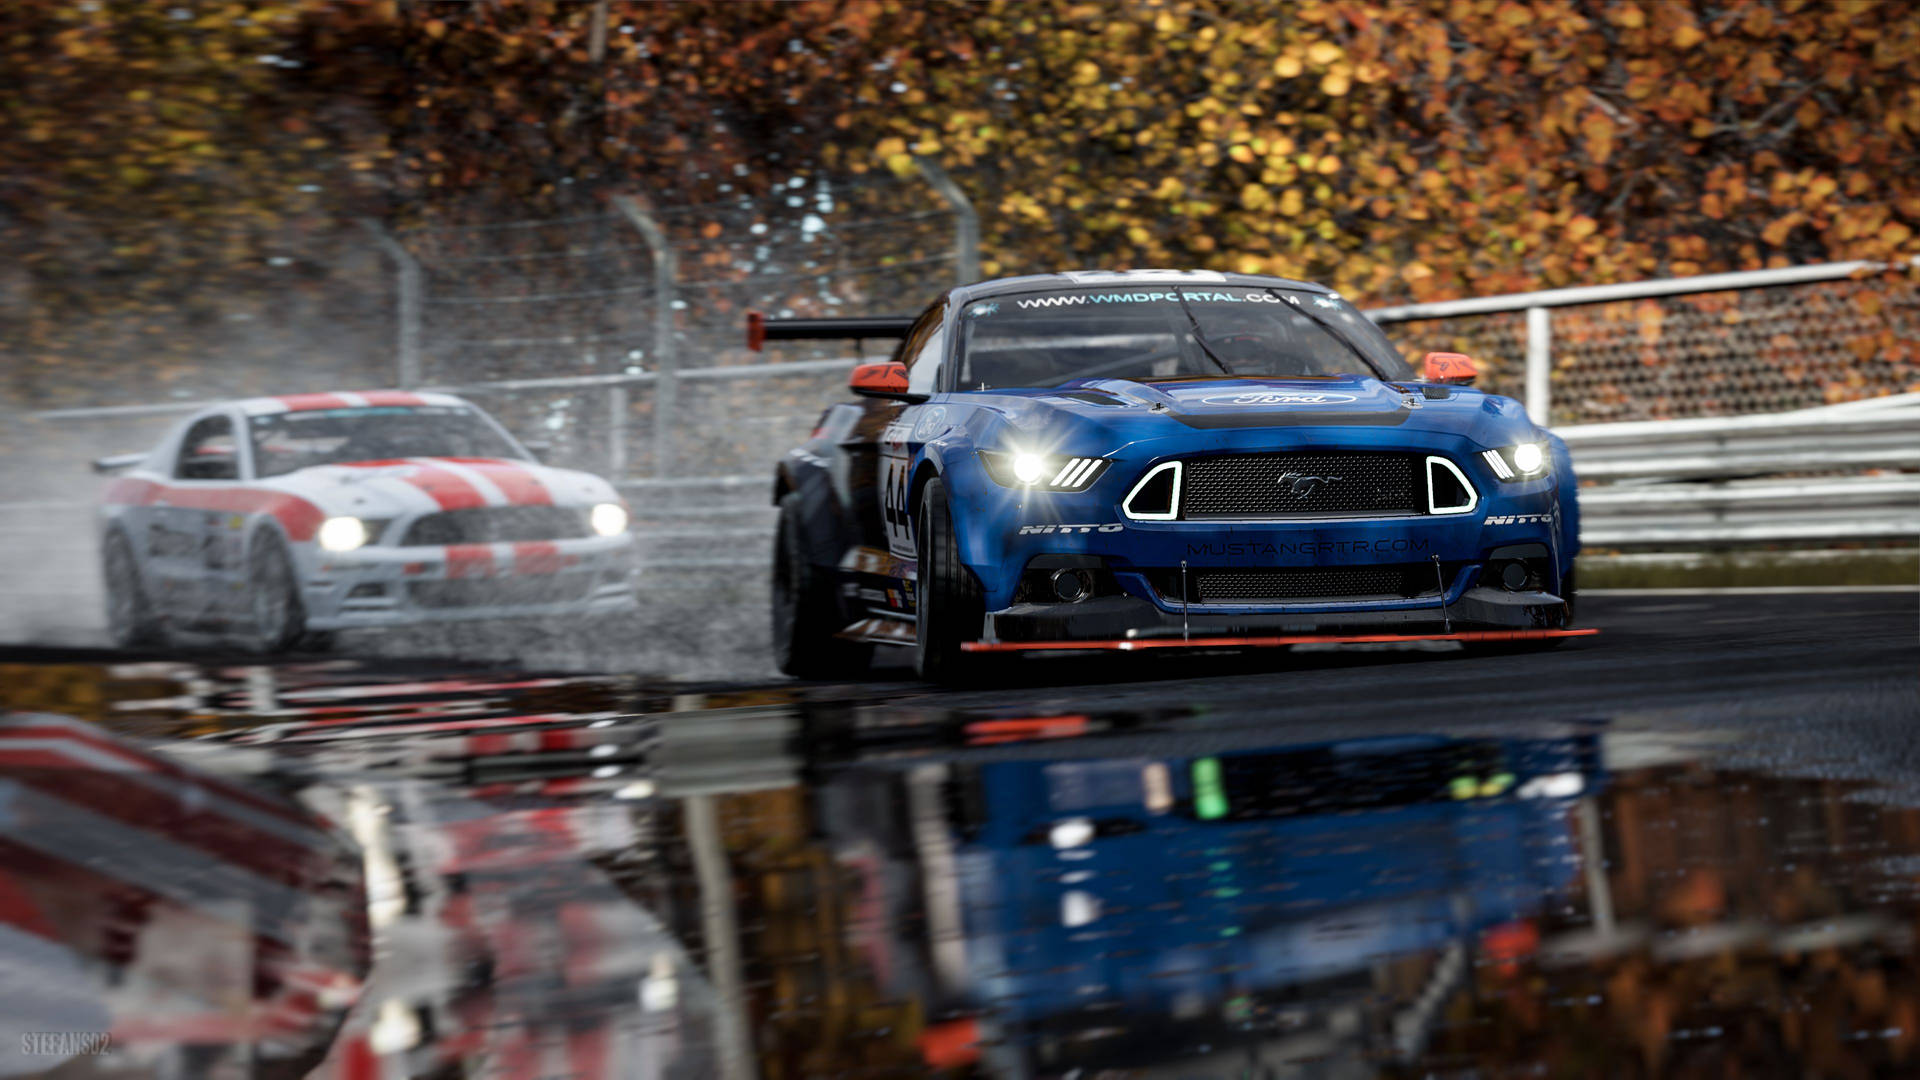 Exhilarating Race With Ford Mustang Rtr In Project Cars 2 Background